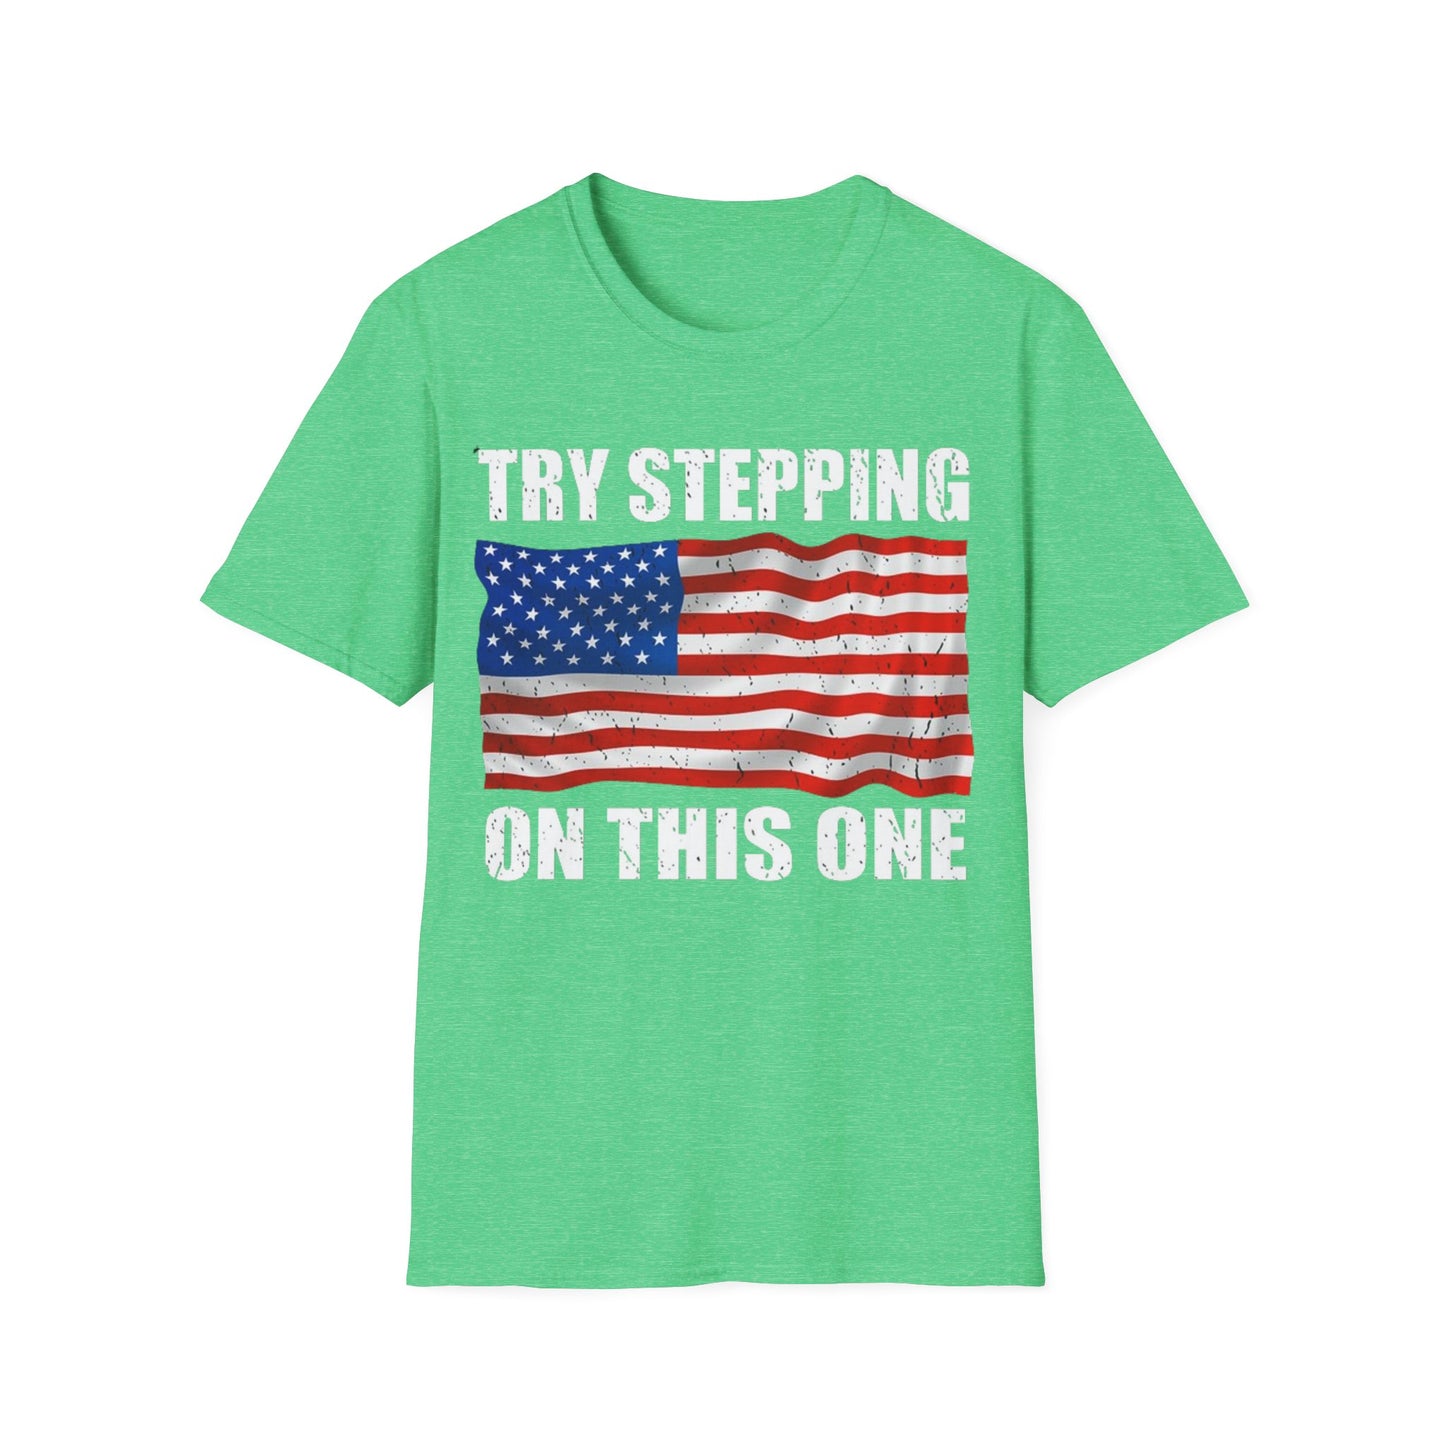 Try Stepping on This One - Unisex Softstyle T-Shirt